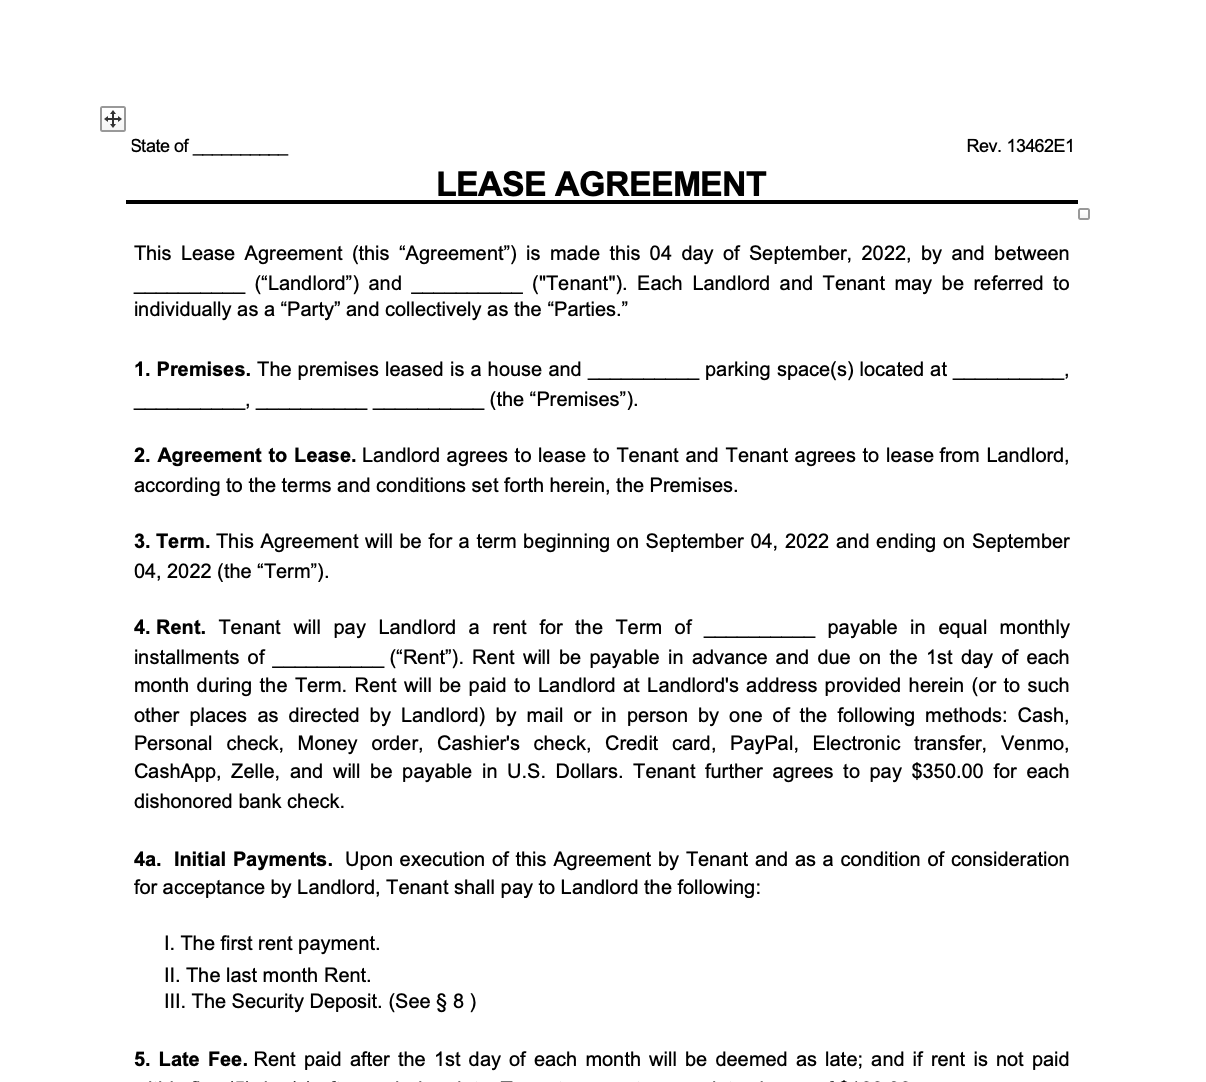 Lease Agreement (Non-Section 8 Tenants)